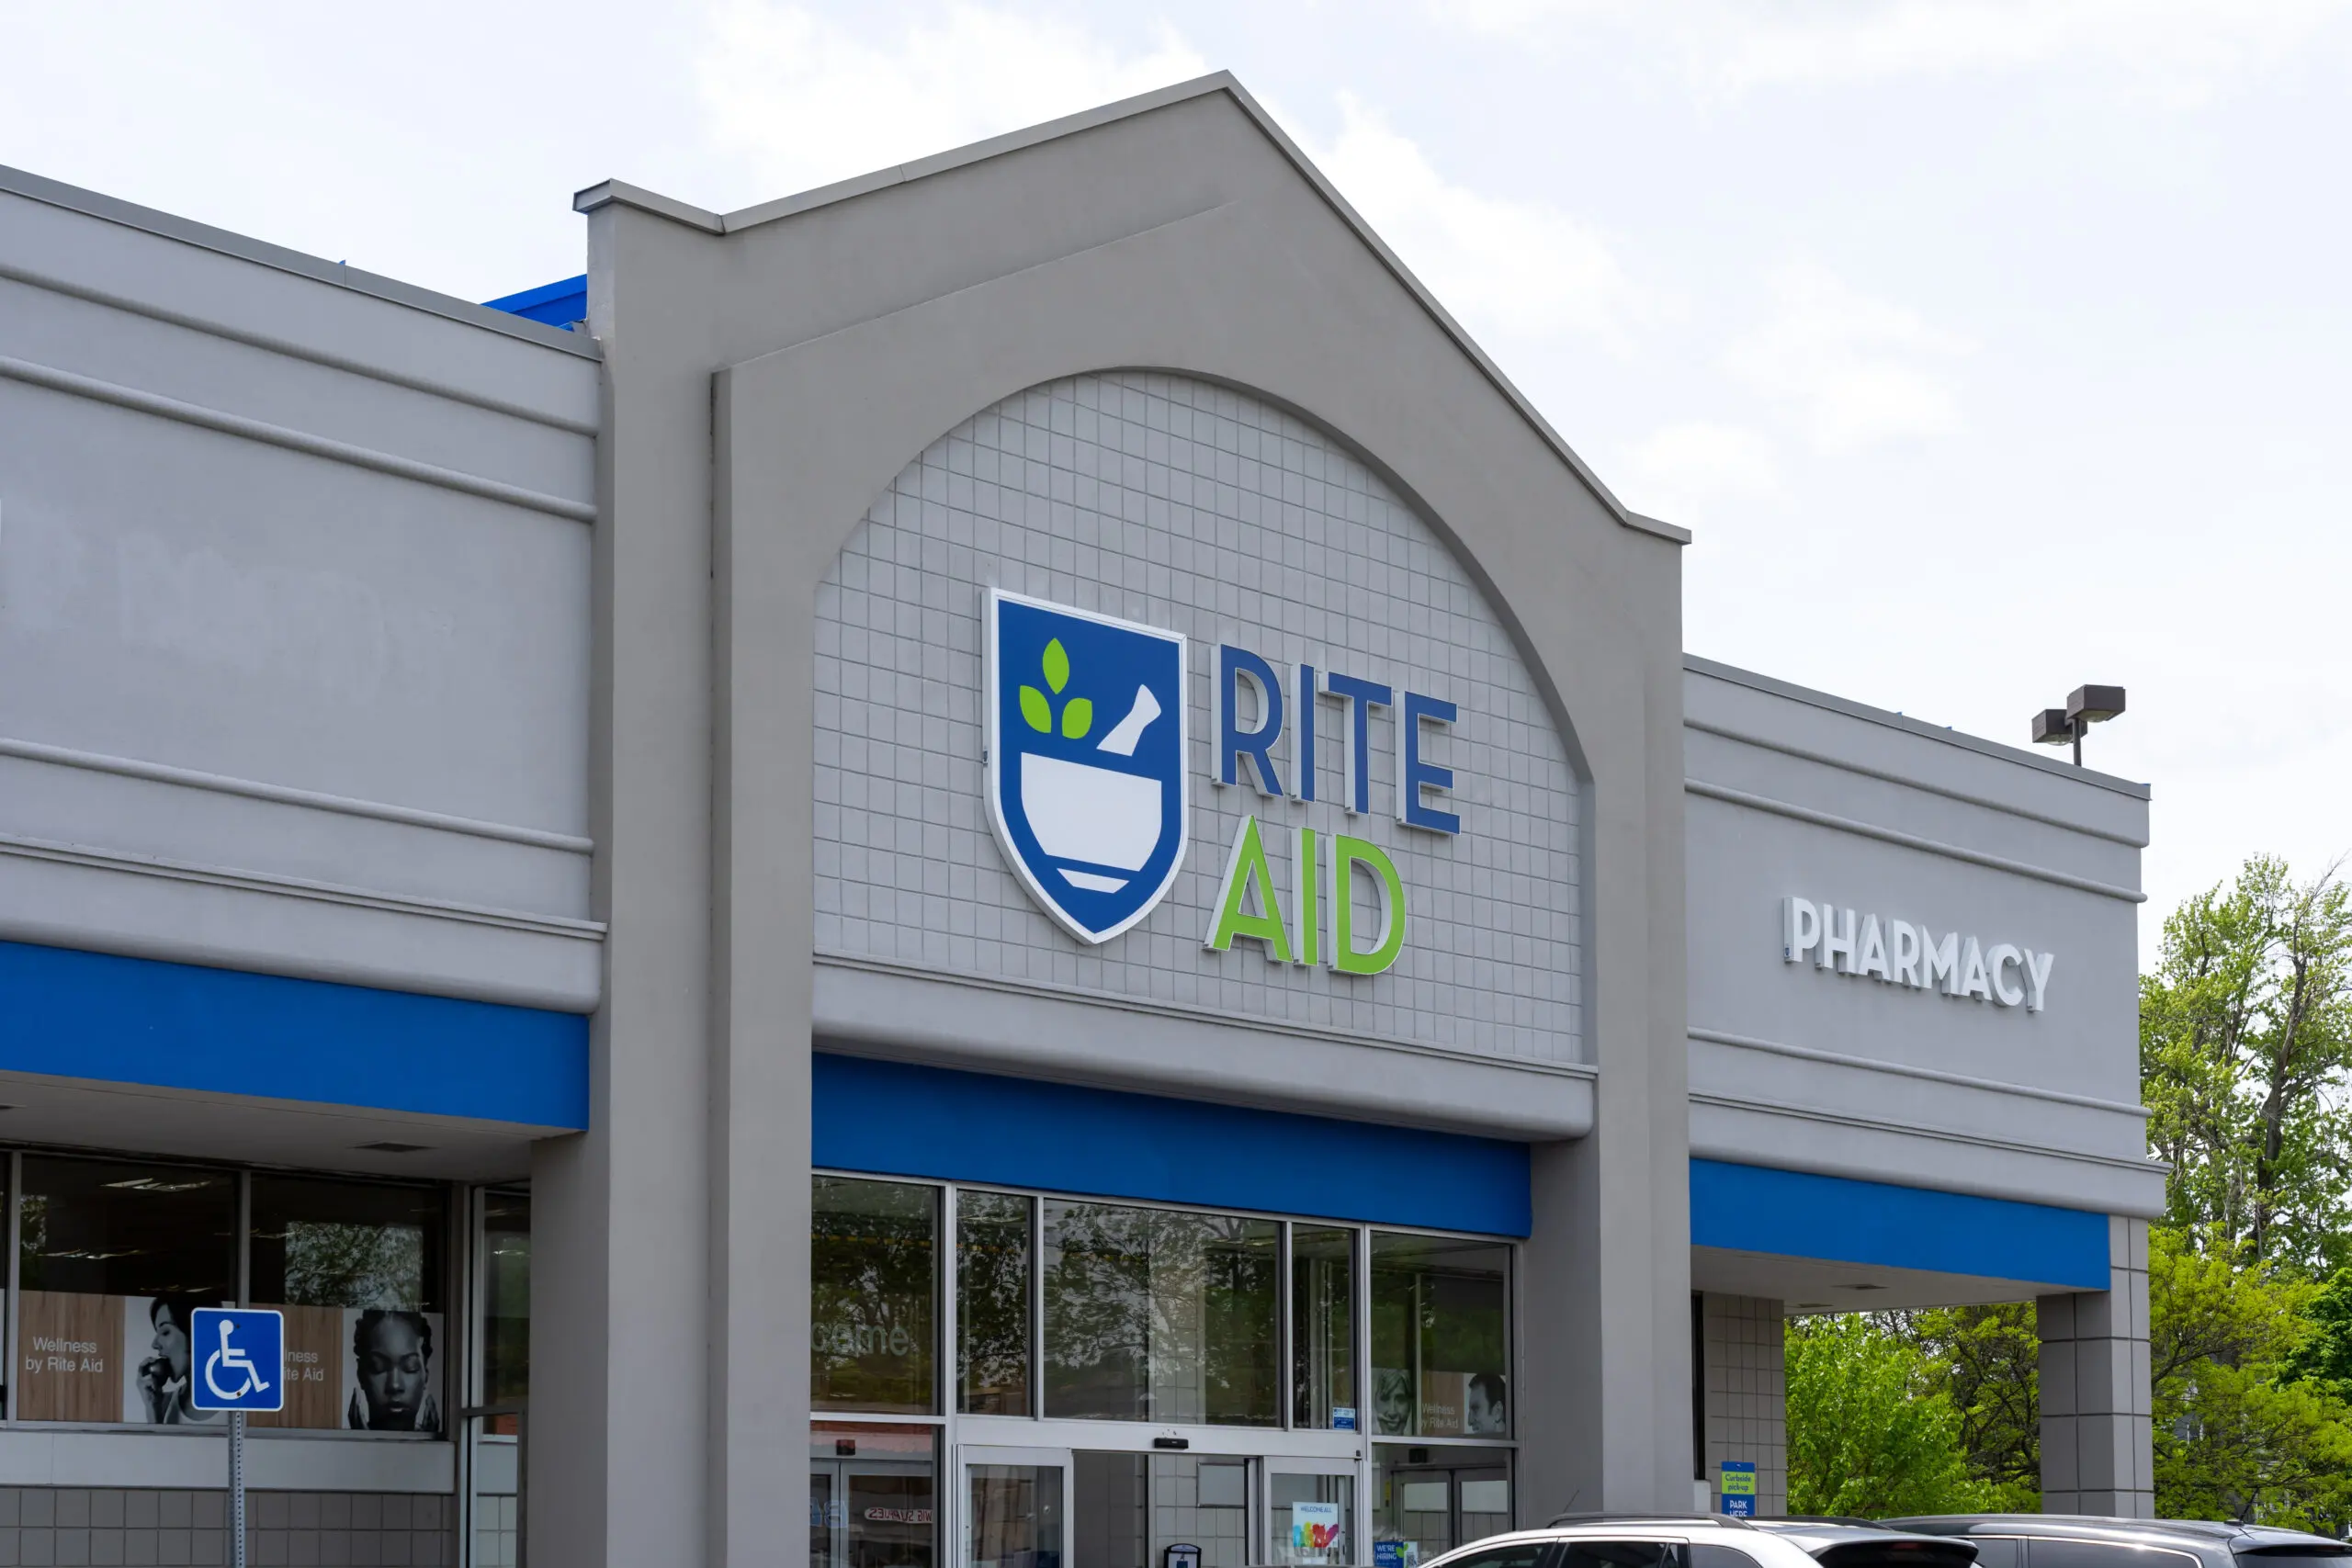 Another Rite Aid Pharmacy Chain Declares Chapter 11 Bankruptcy